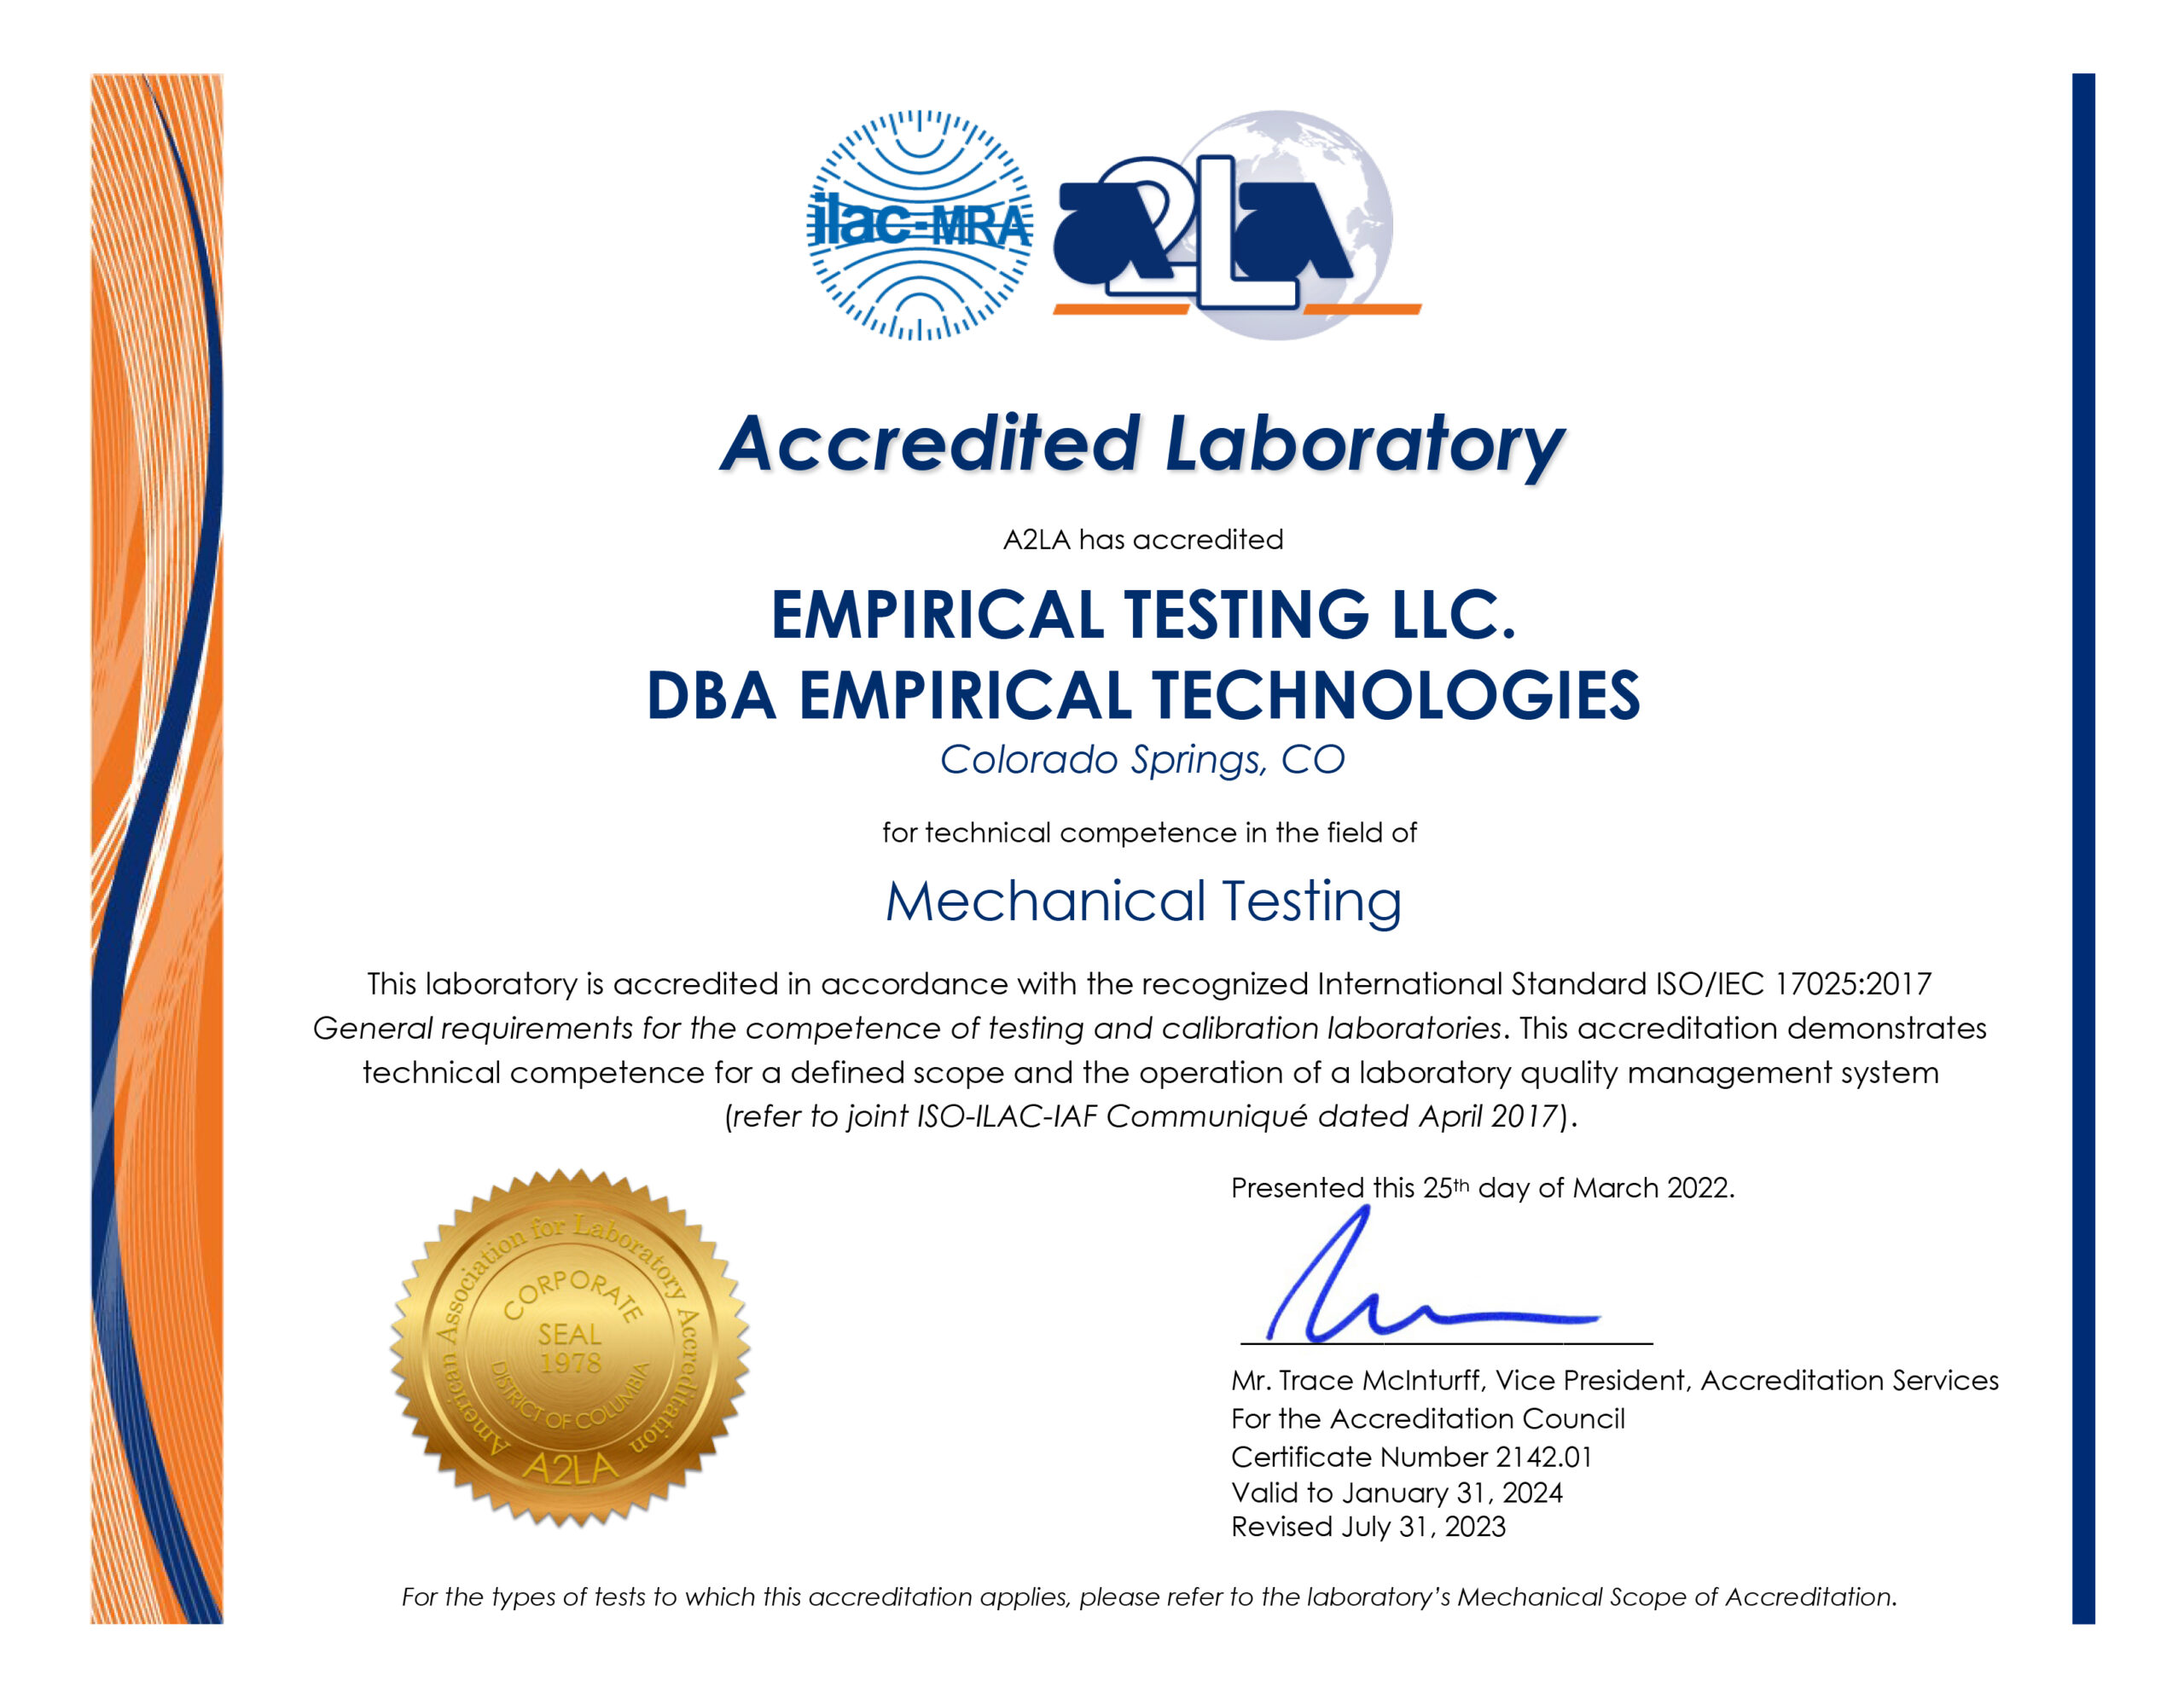 Empirical Technologies' A2LA Certification for ISO 17025:2017 Accreditation